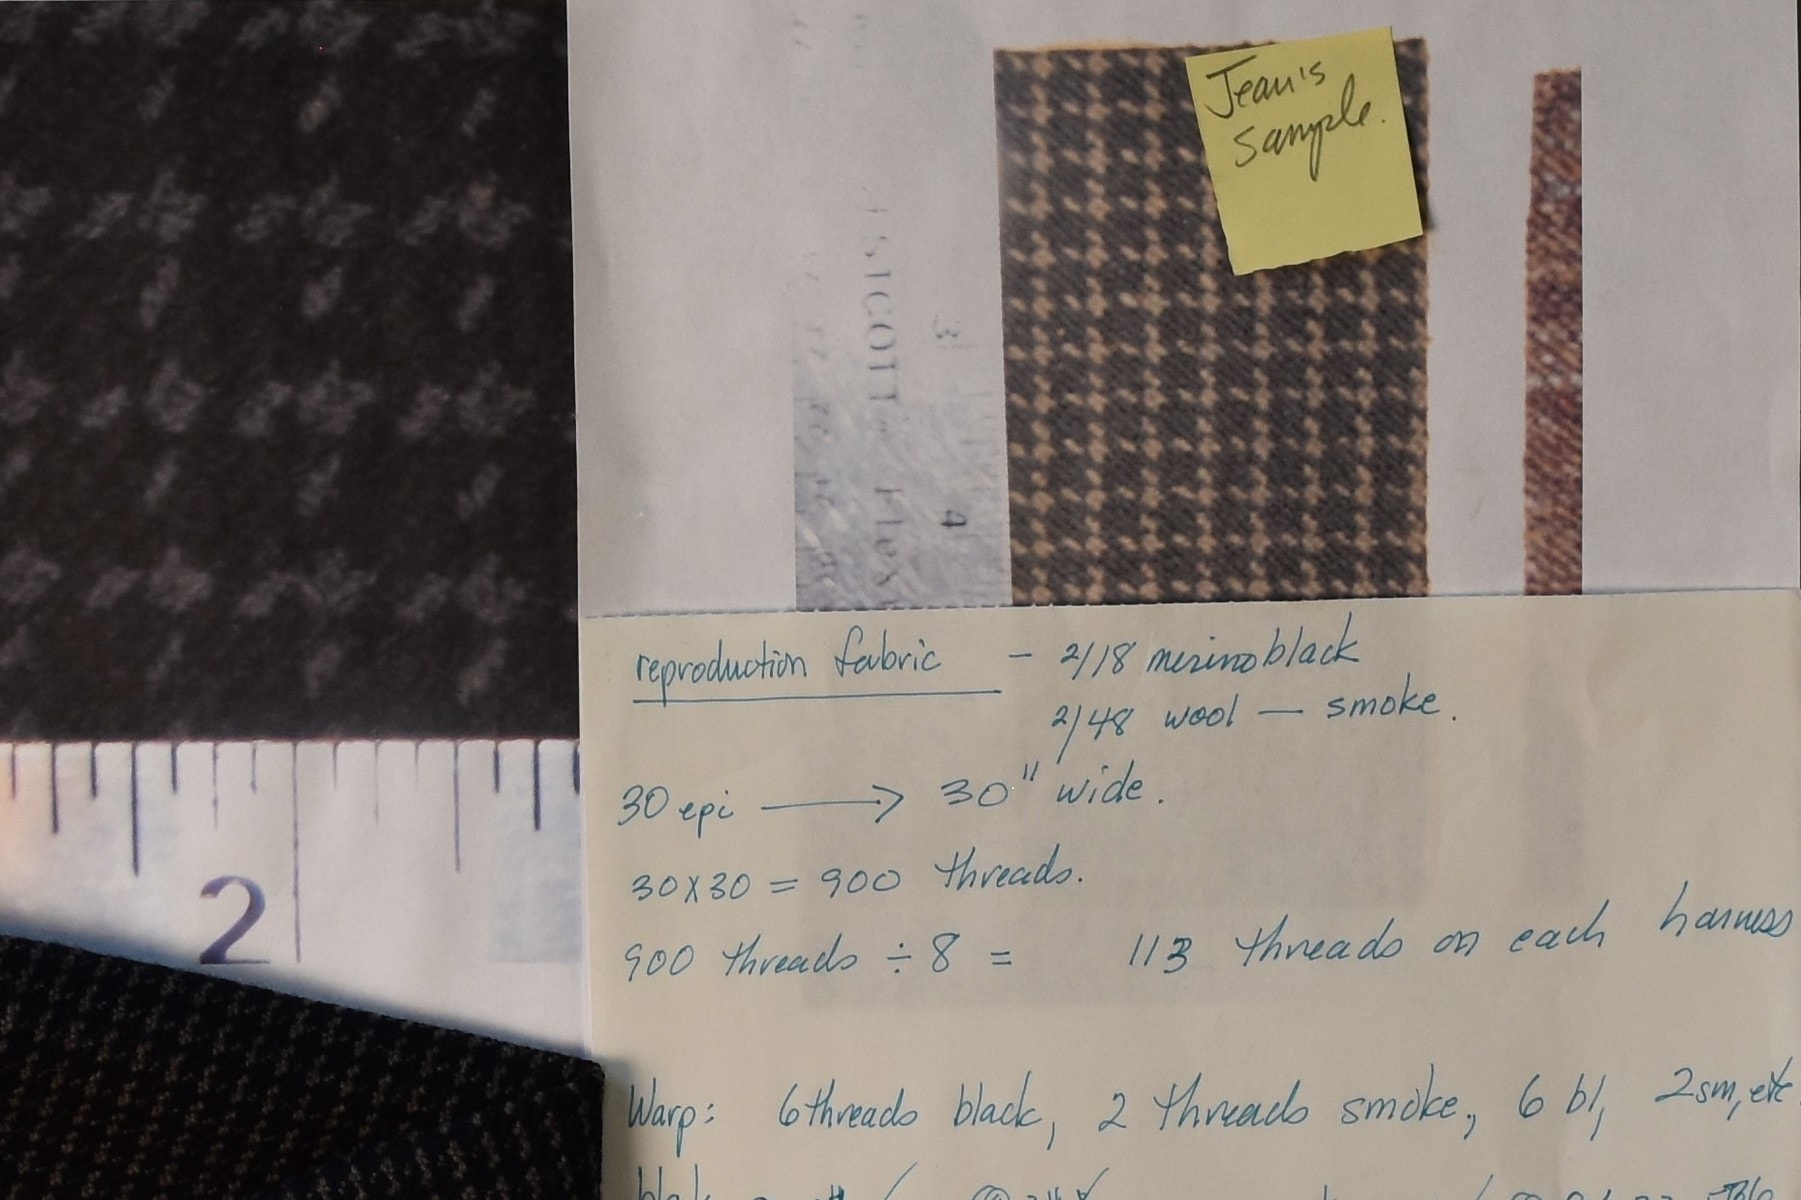 image description: several items lying together on a table - a fabric sample, a close-up photograph of similar fabric, and some handwritten technical notes